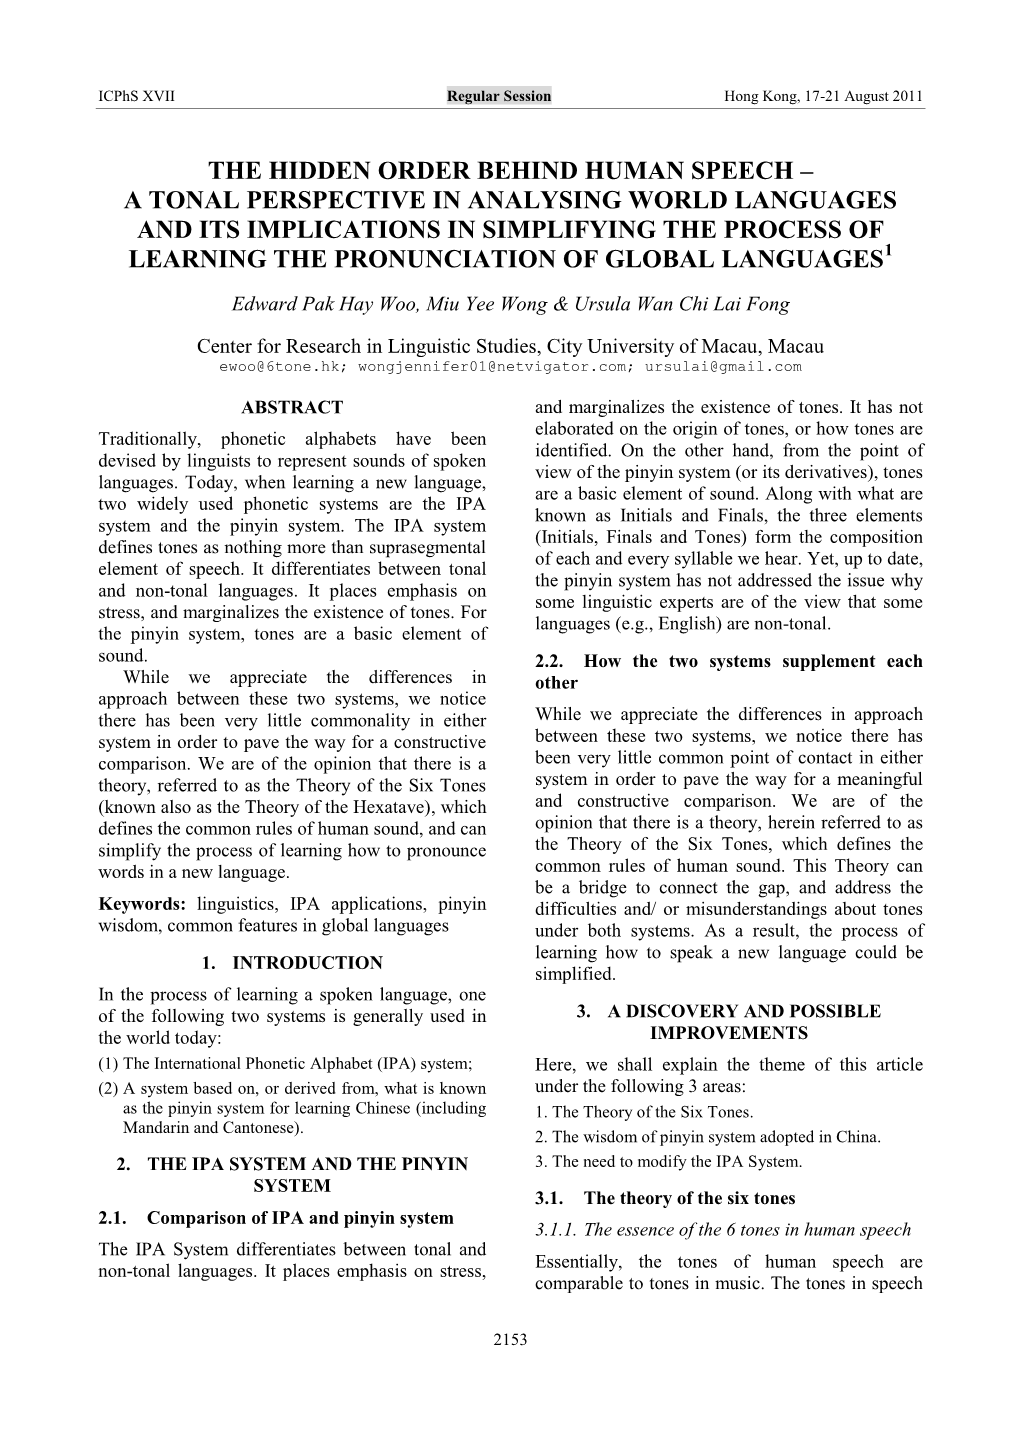 A Tonal Perspective in Analysing World Languages and Its Implications in Simplifying the Process of Learning the Pronunciation of Global Languages1